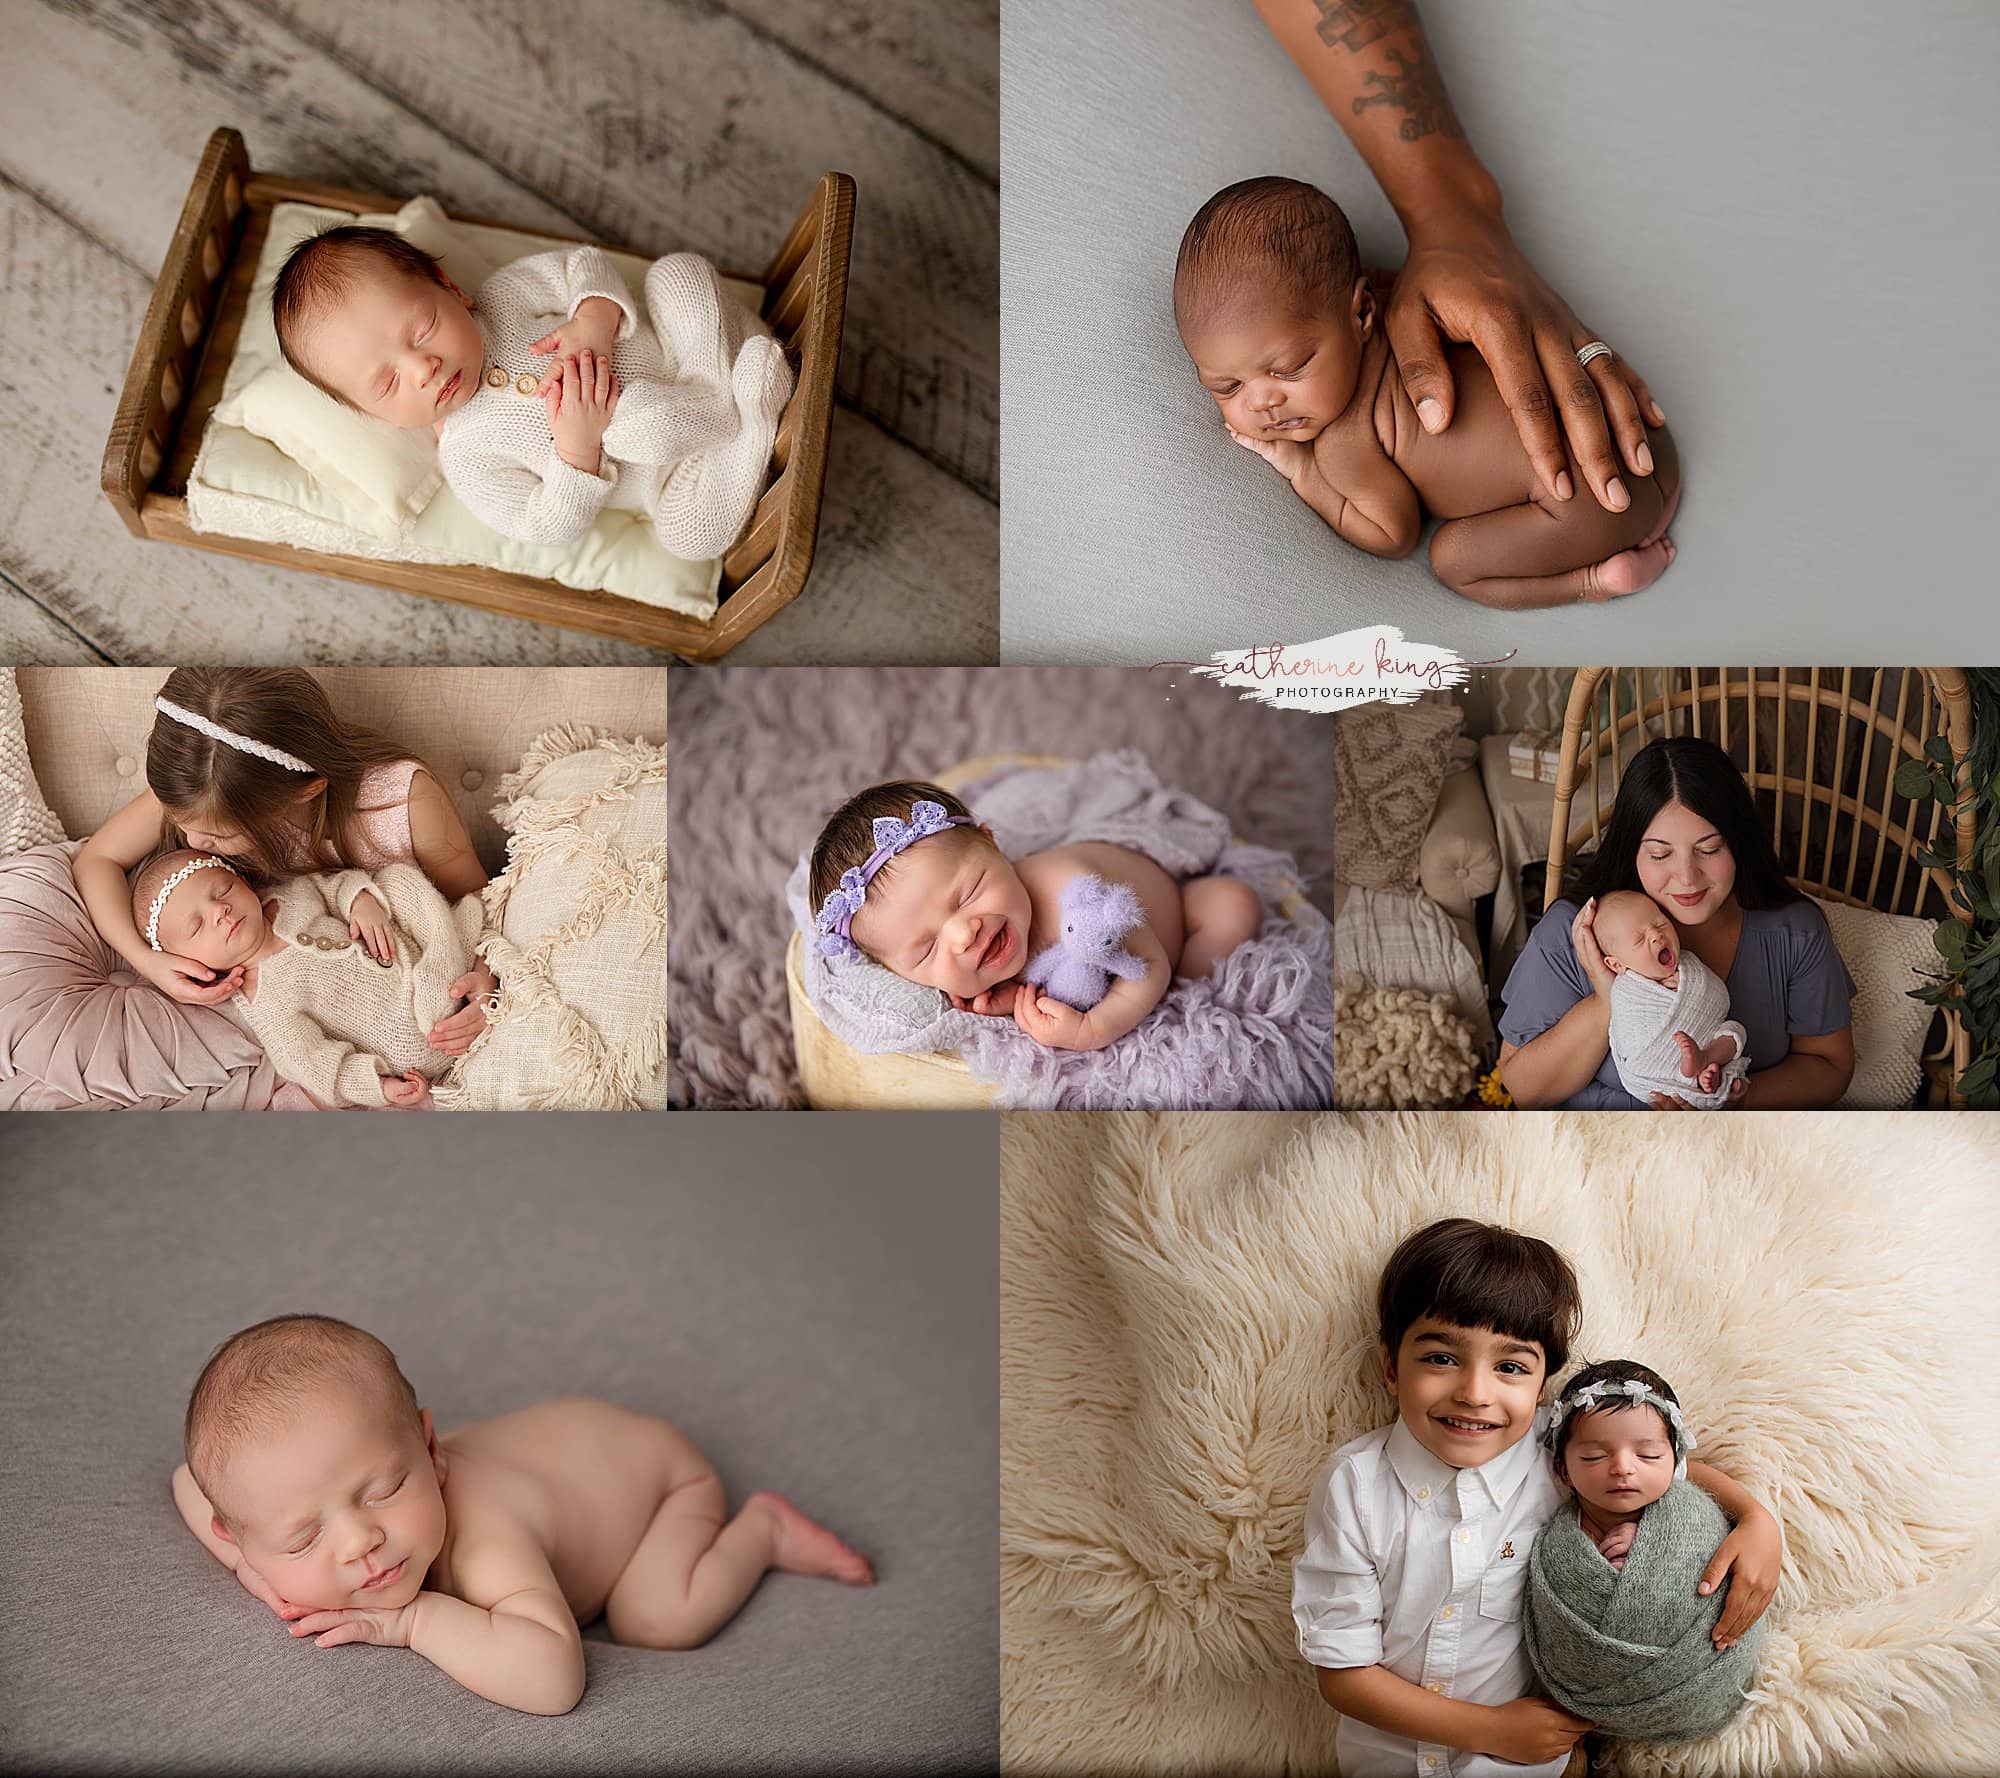 how to choose a photographer for your newborn baby